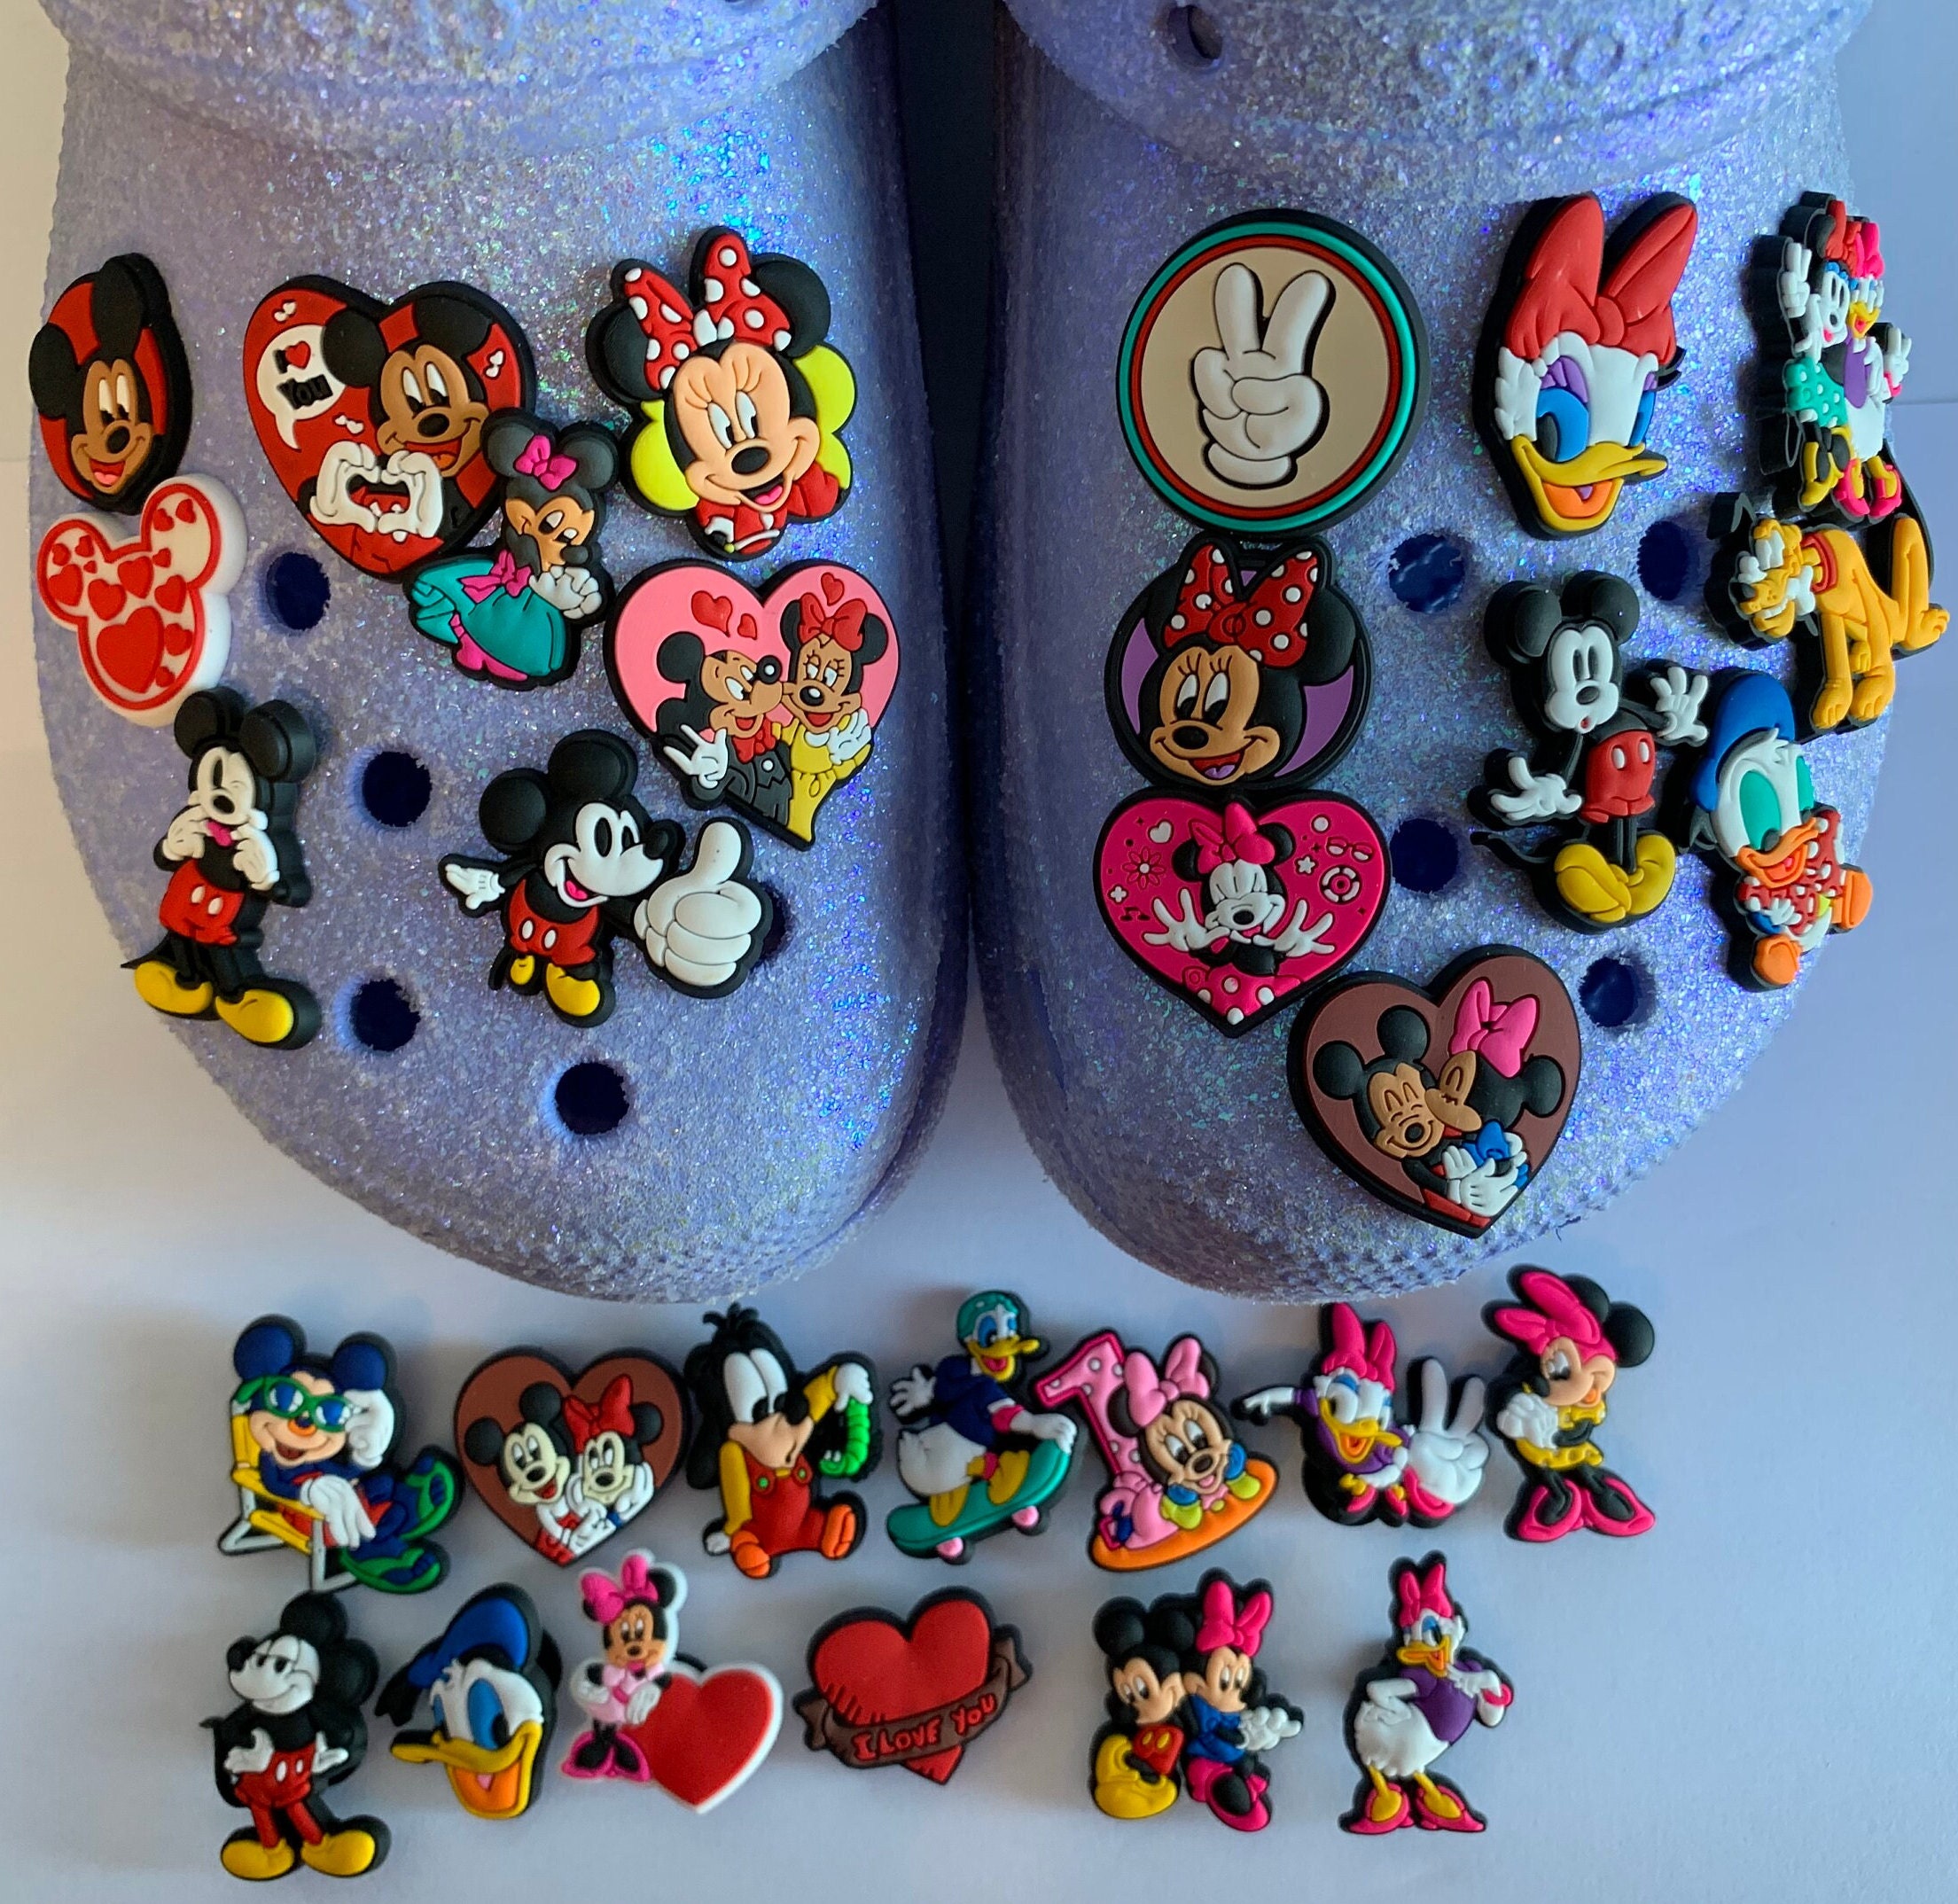 Crocs Mickey Mouse & Minnie Mouse Rubber Jibbitz